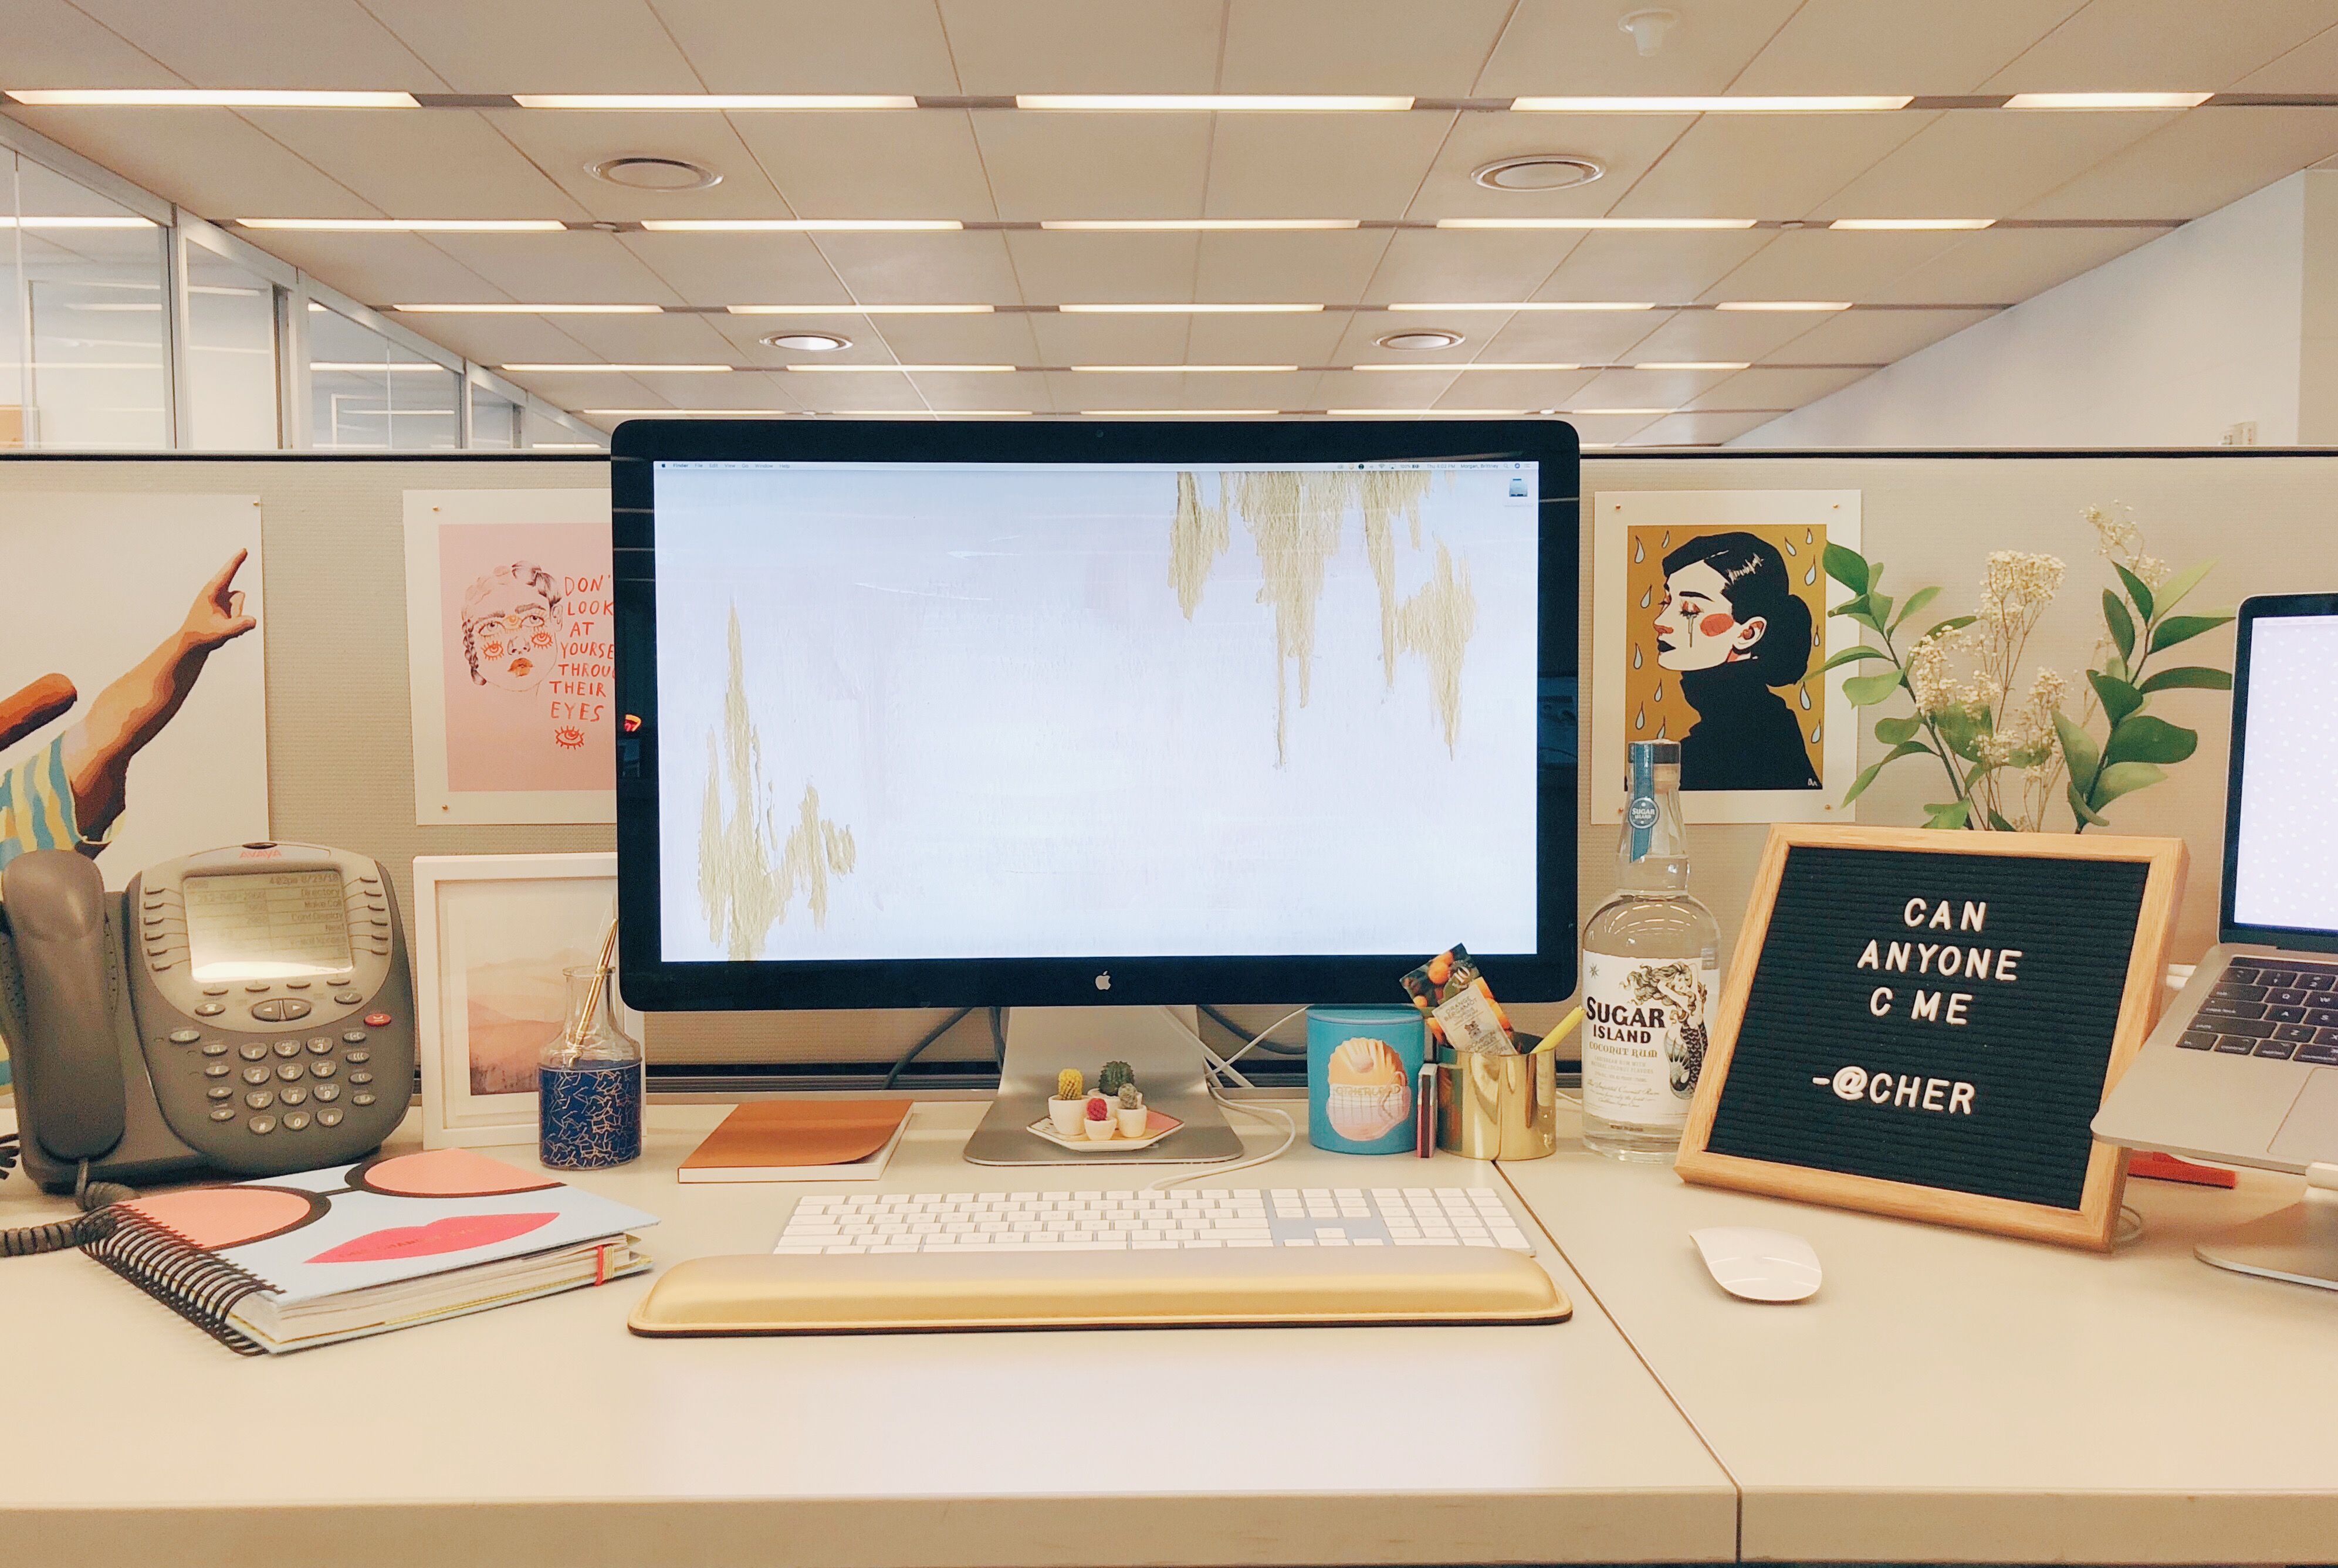 10 Best Cubicle Decor Ideas In 2018, How To Decorate My Office